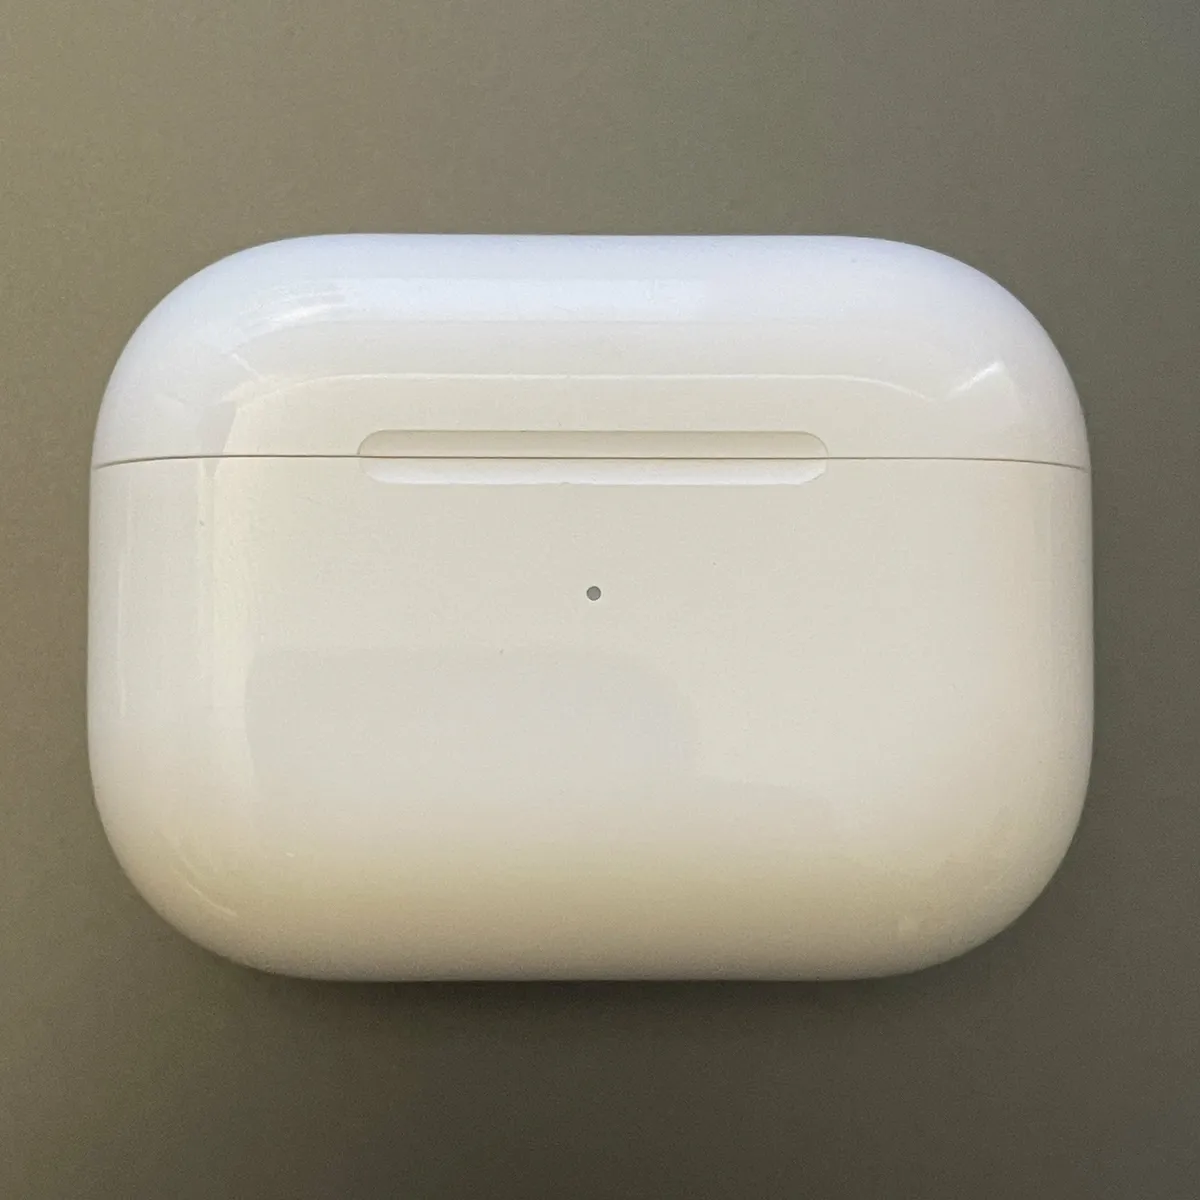 Apple AirPods Pro Original Replacement Charging Case - A2190 - Fast!